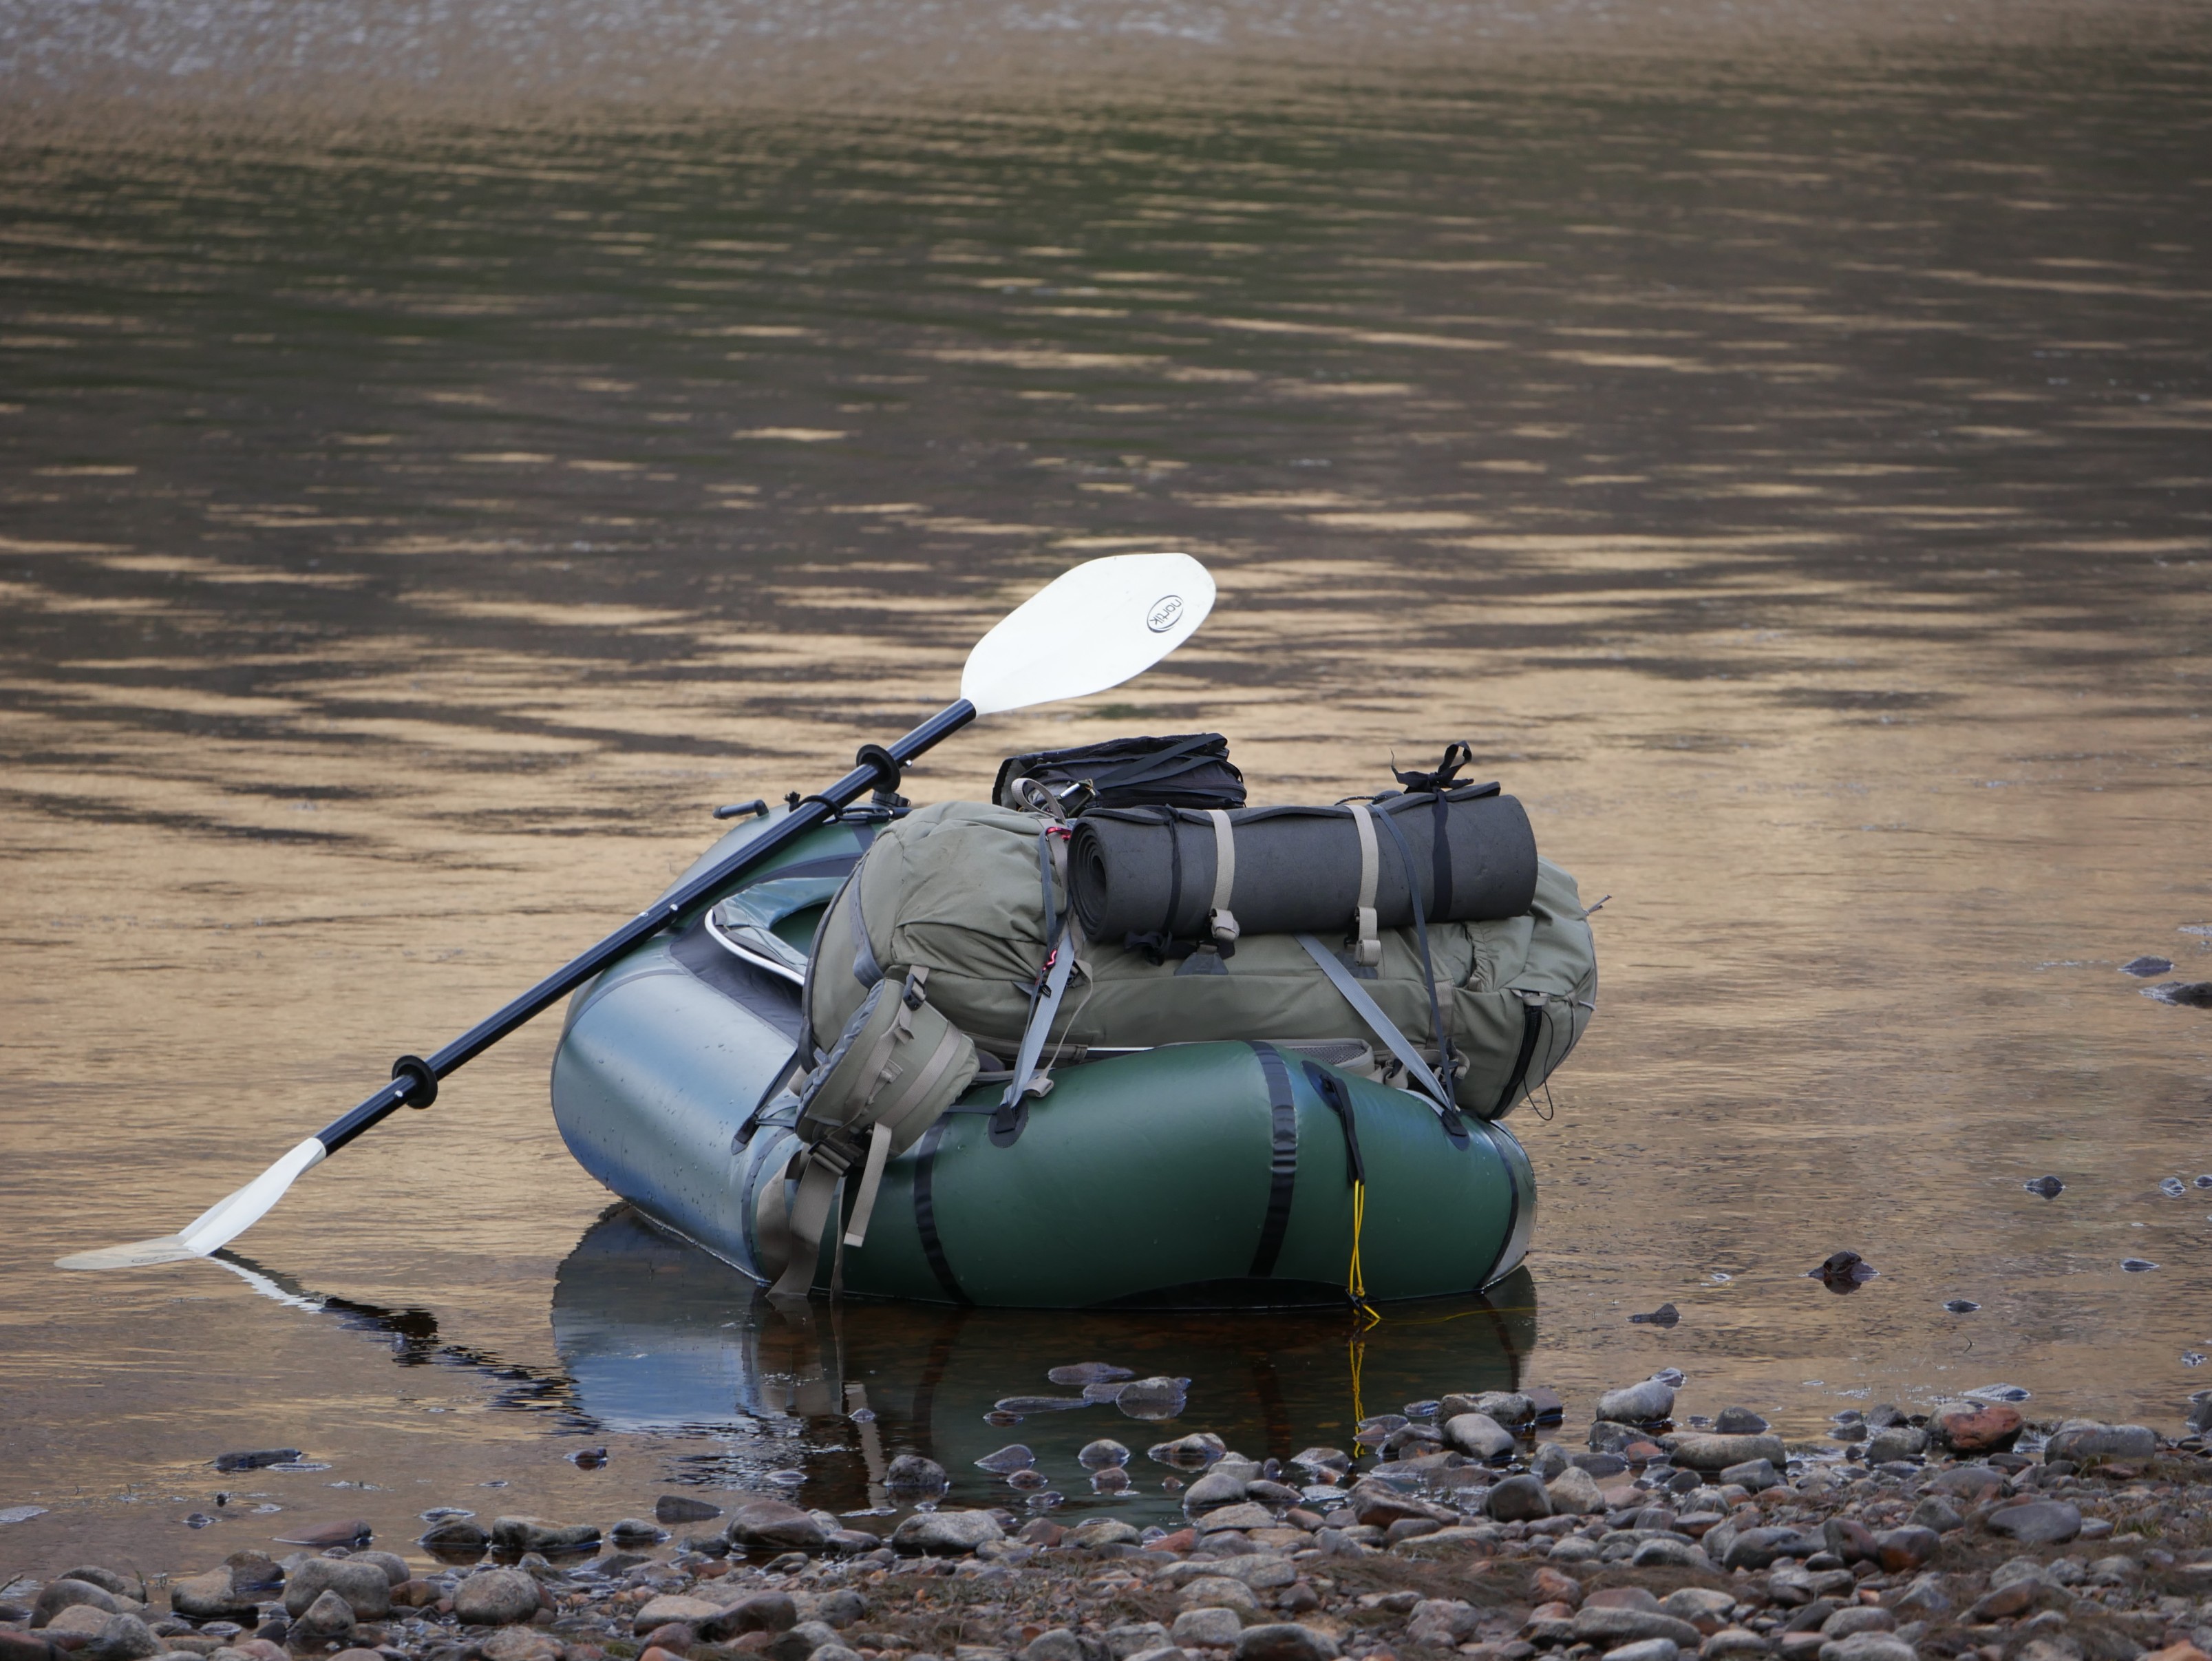 Packrafting Essentials | Buyer's Guide For Choosing The Best Lightweight Inflatable Raft